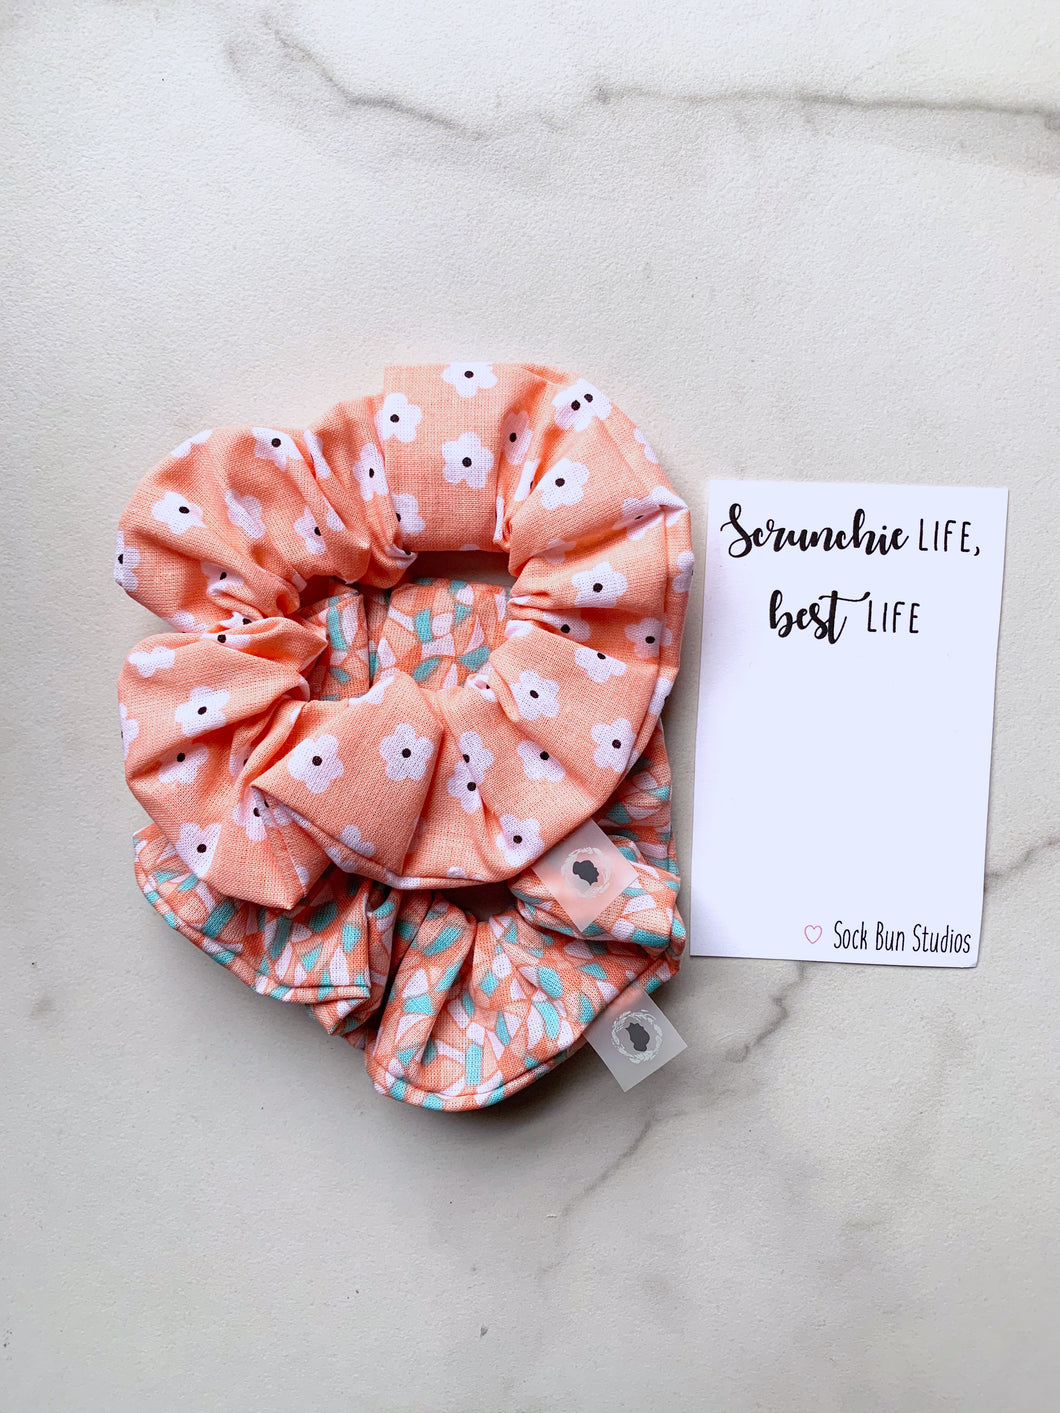 SALE WEEKLY DUO Creamsicle Daydream Scrunchie Duo